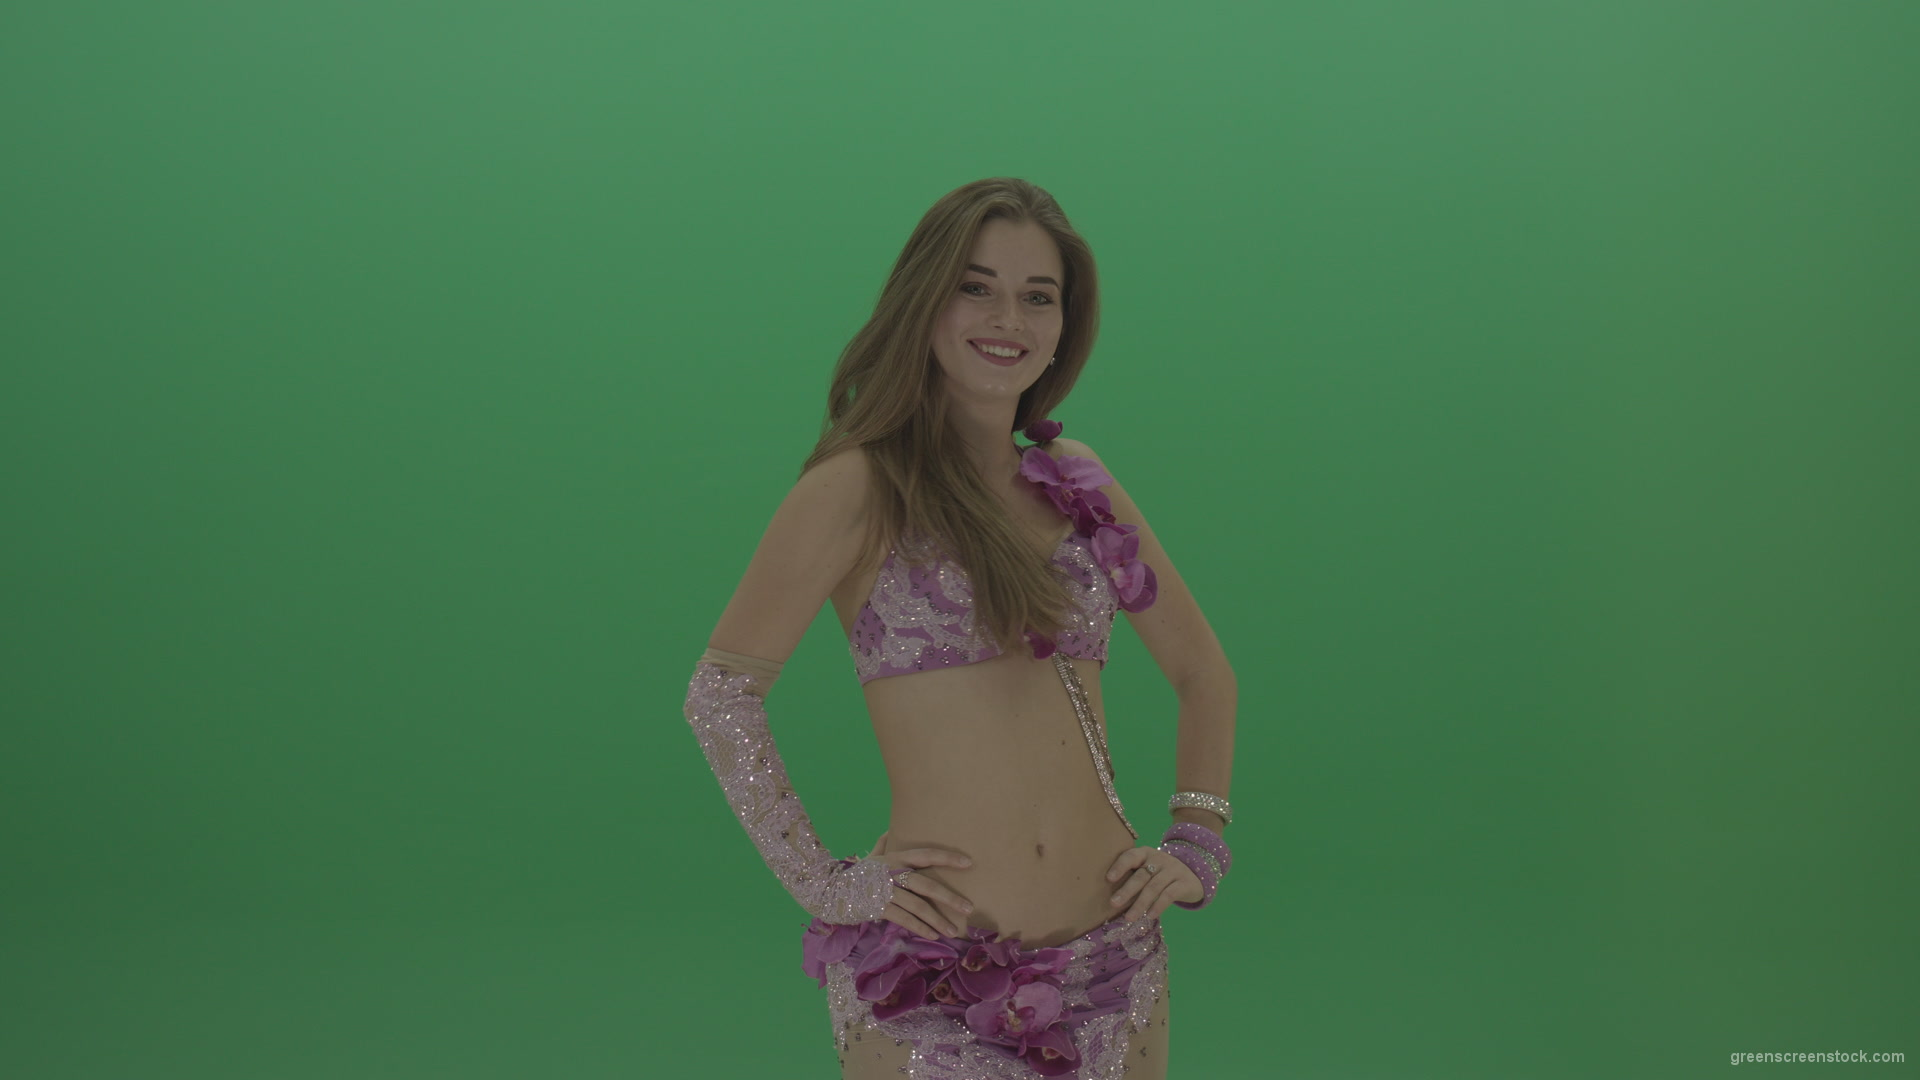 Beautiful-belly-dancer-in-purple-wear-winks-as-she-poses-over-green-screen-background_004 Green Screen Stock